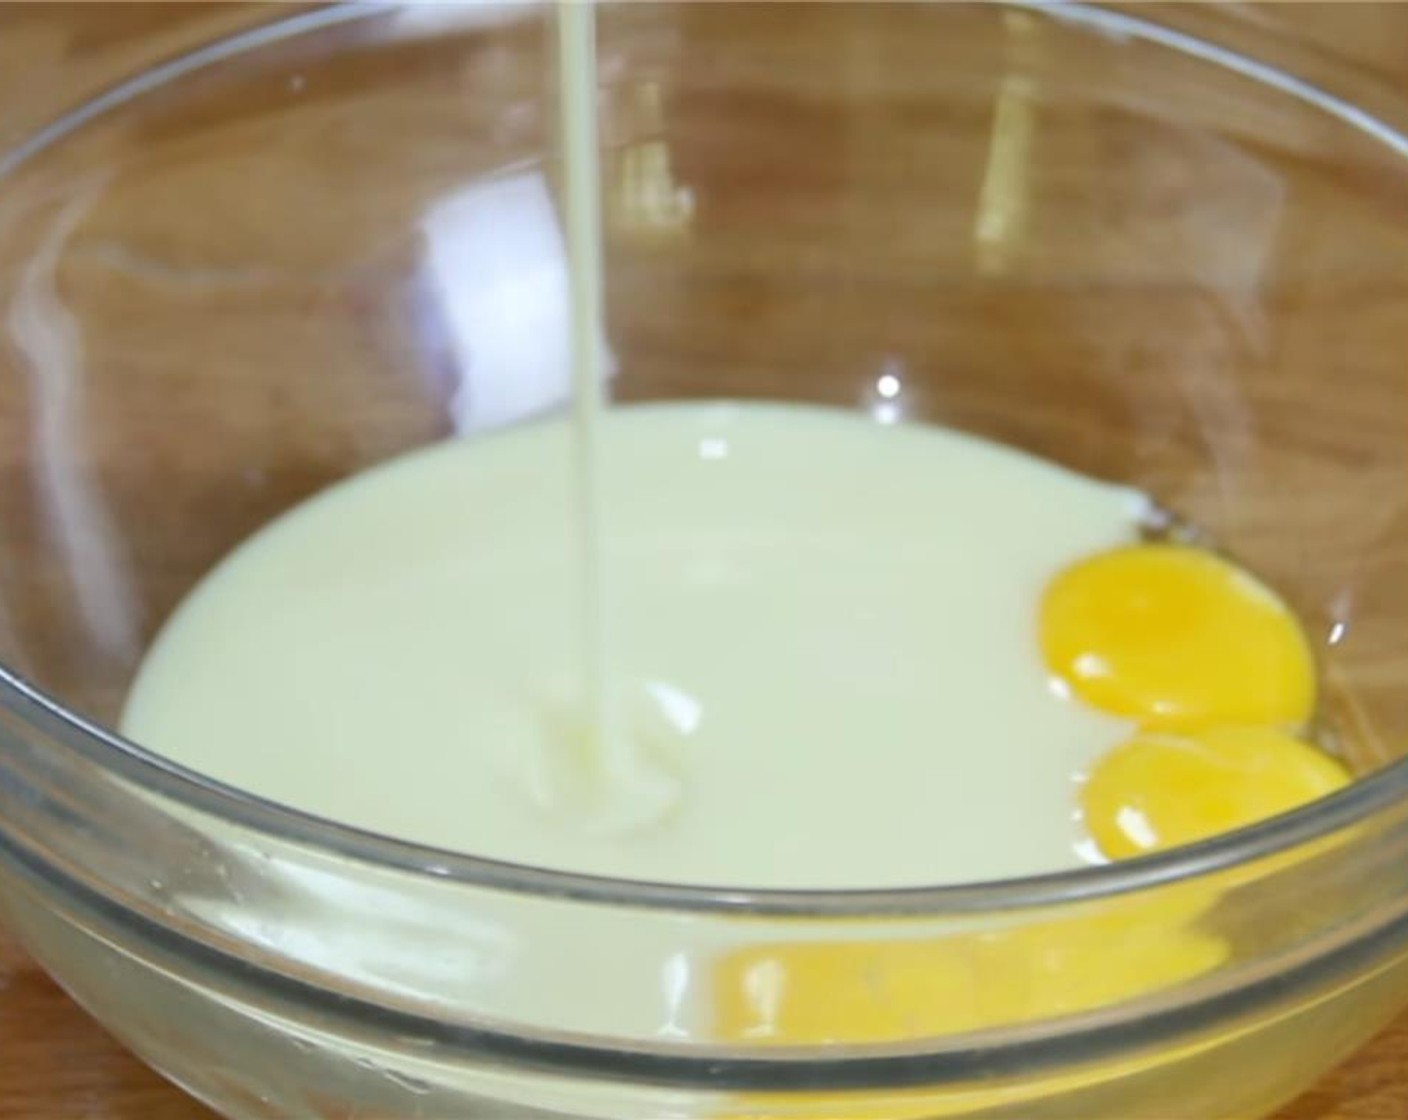 step 2 Combine the Eggs (4) and Sweetened Condensed Milk (1 1/3 cups) in a bowl and whisk until they are well combined.